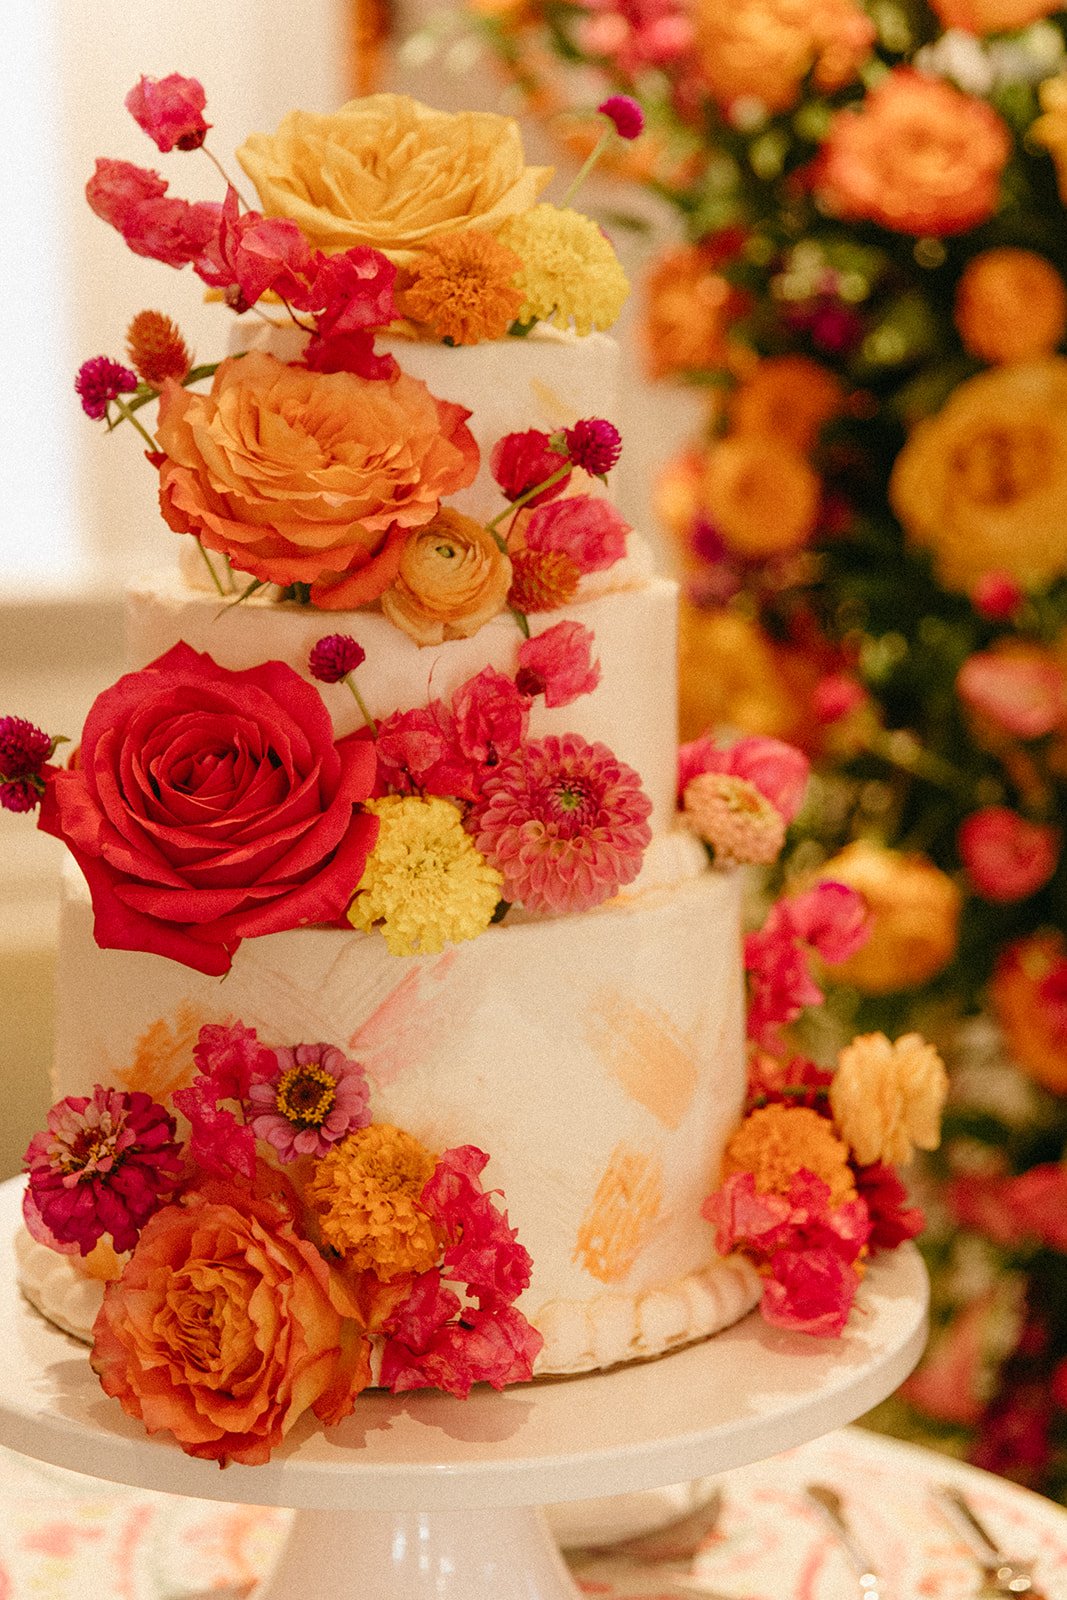 Colorful and vibrant wedding cake with Indian elements